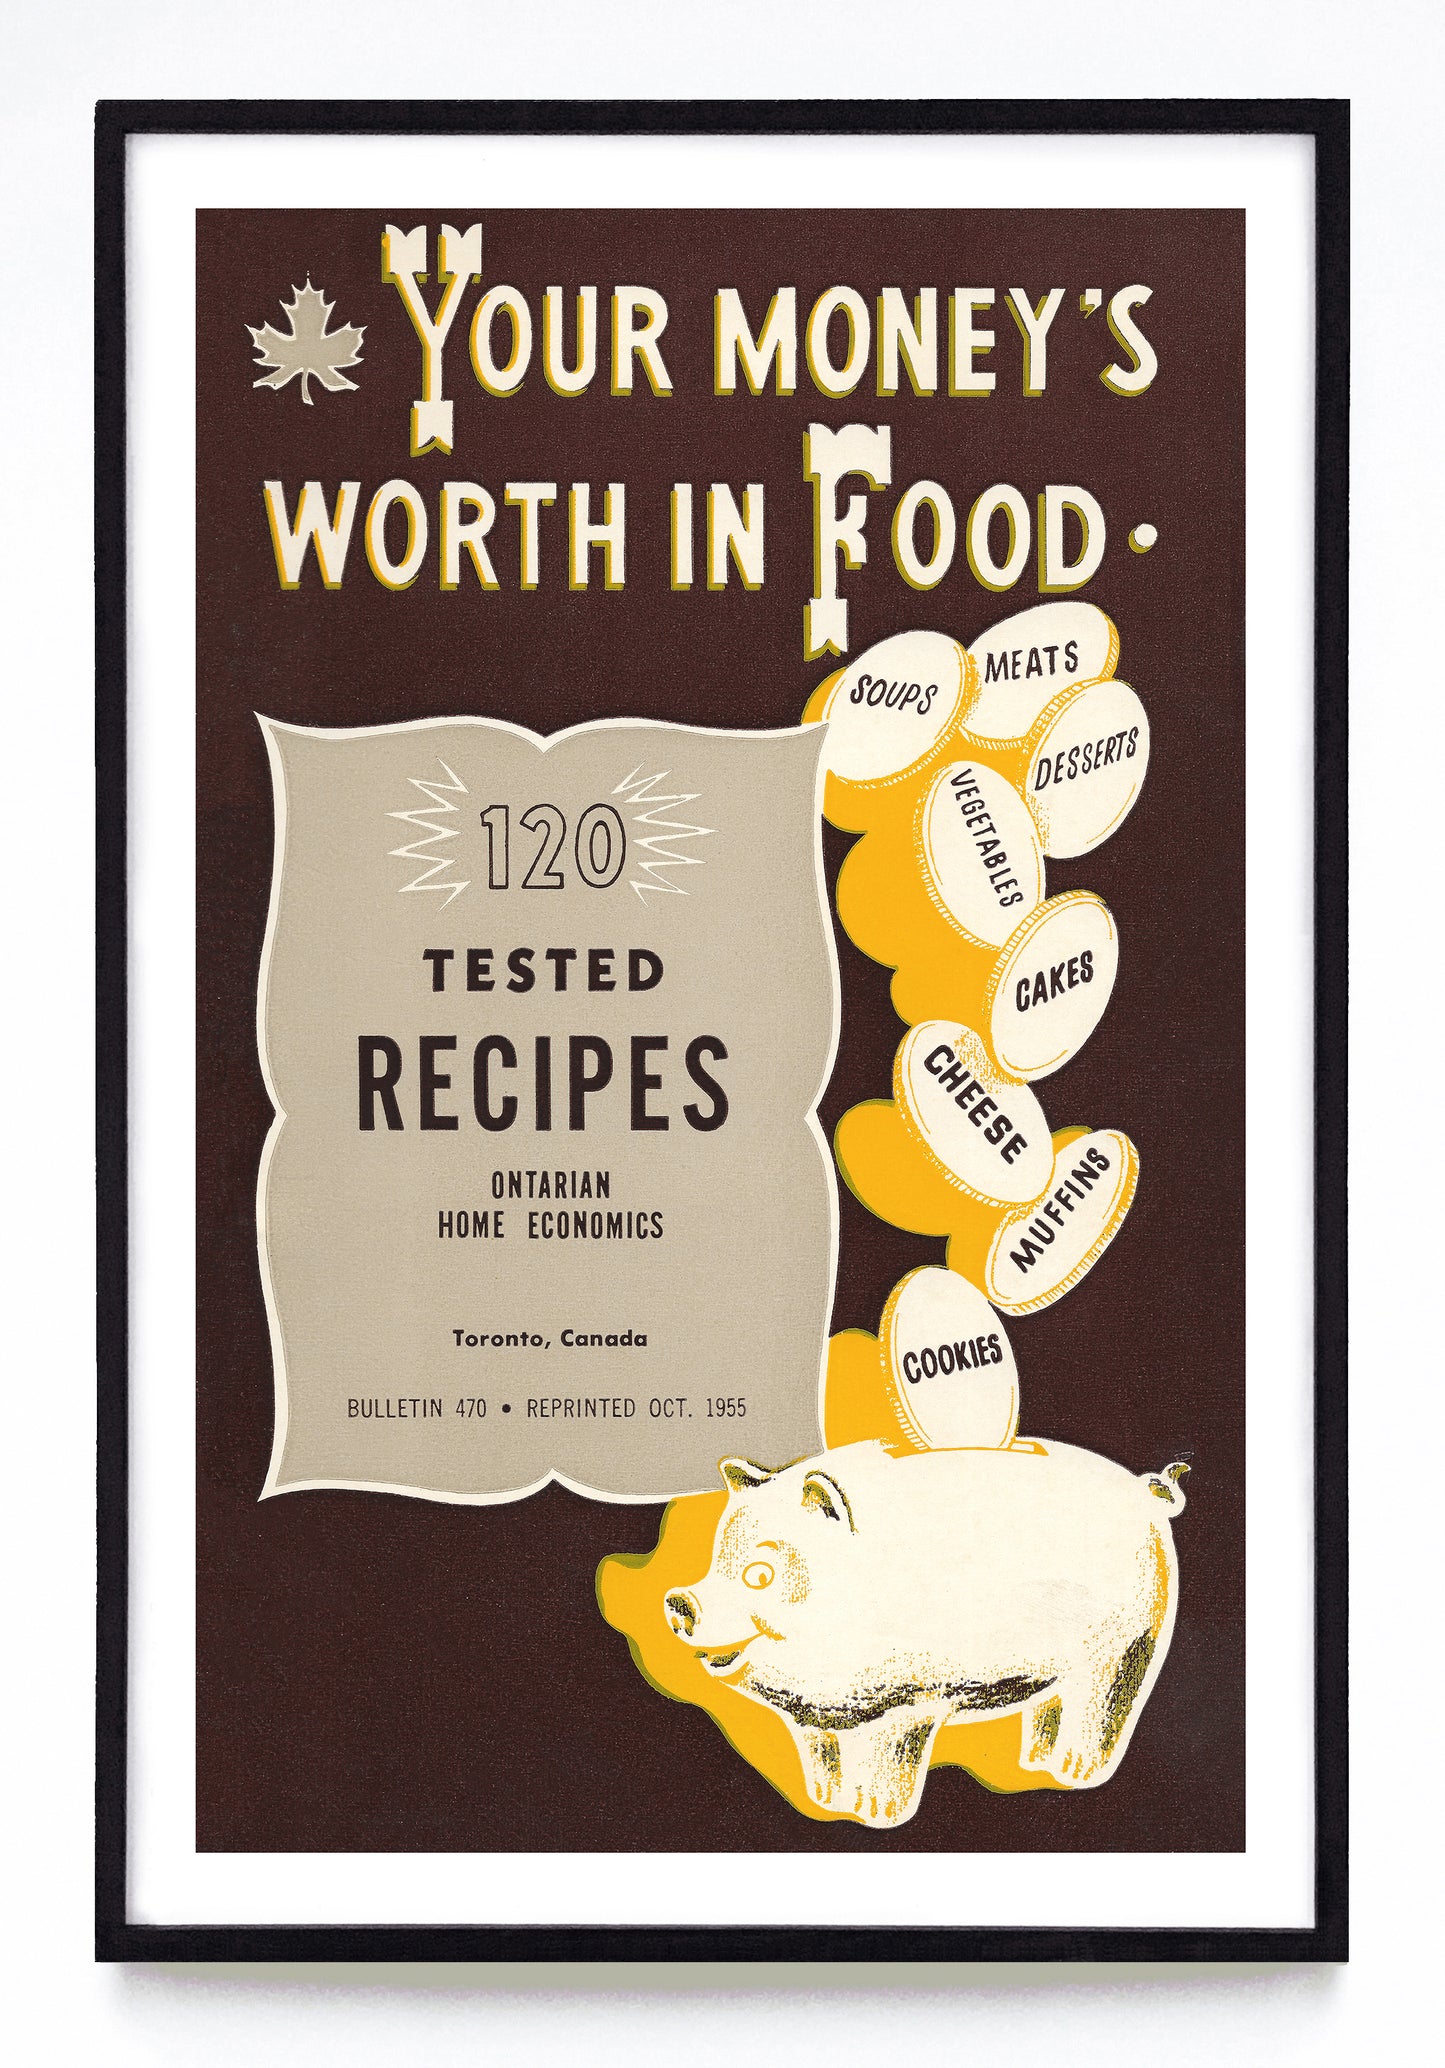 "Your Money's Worth in Food" print (1955)